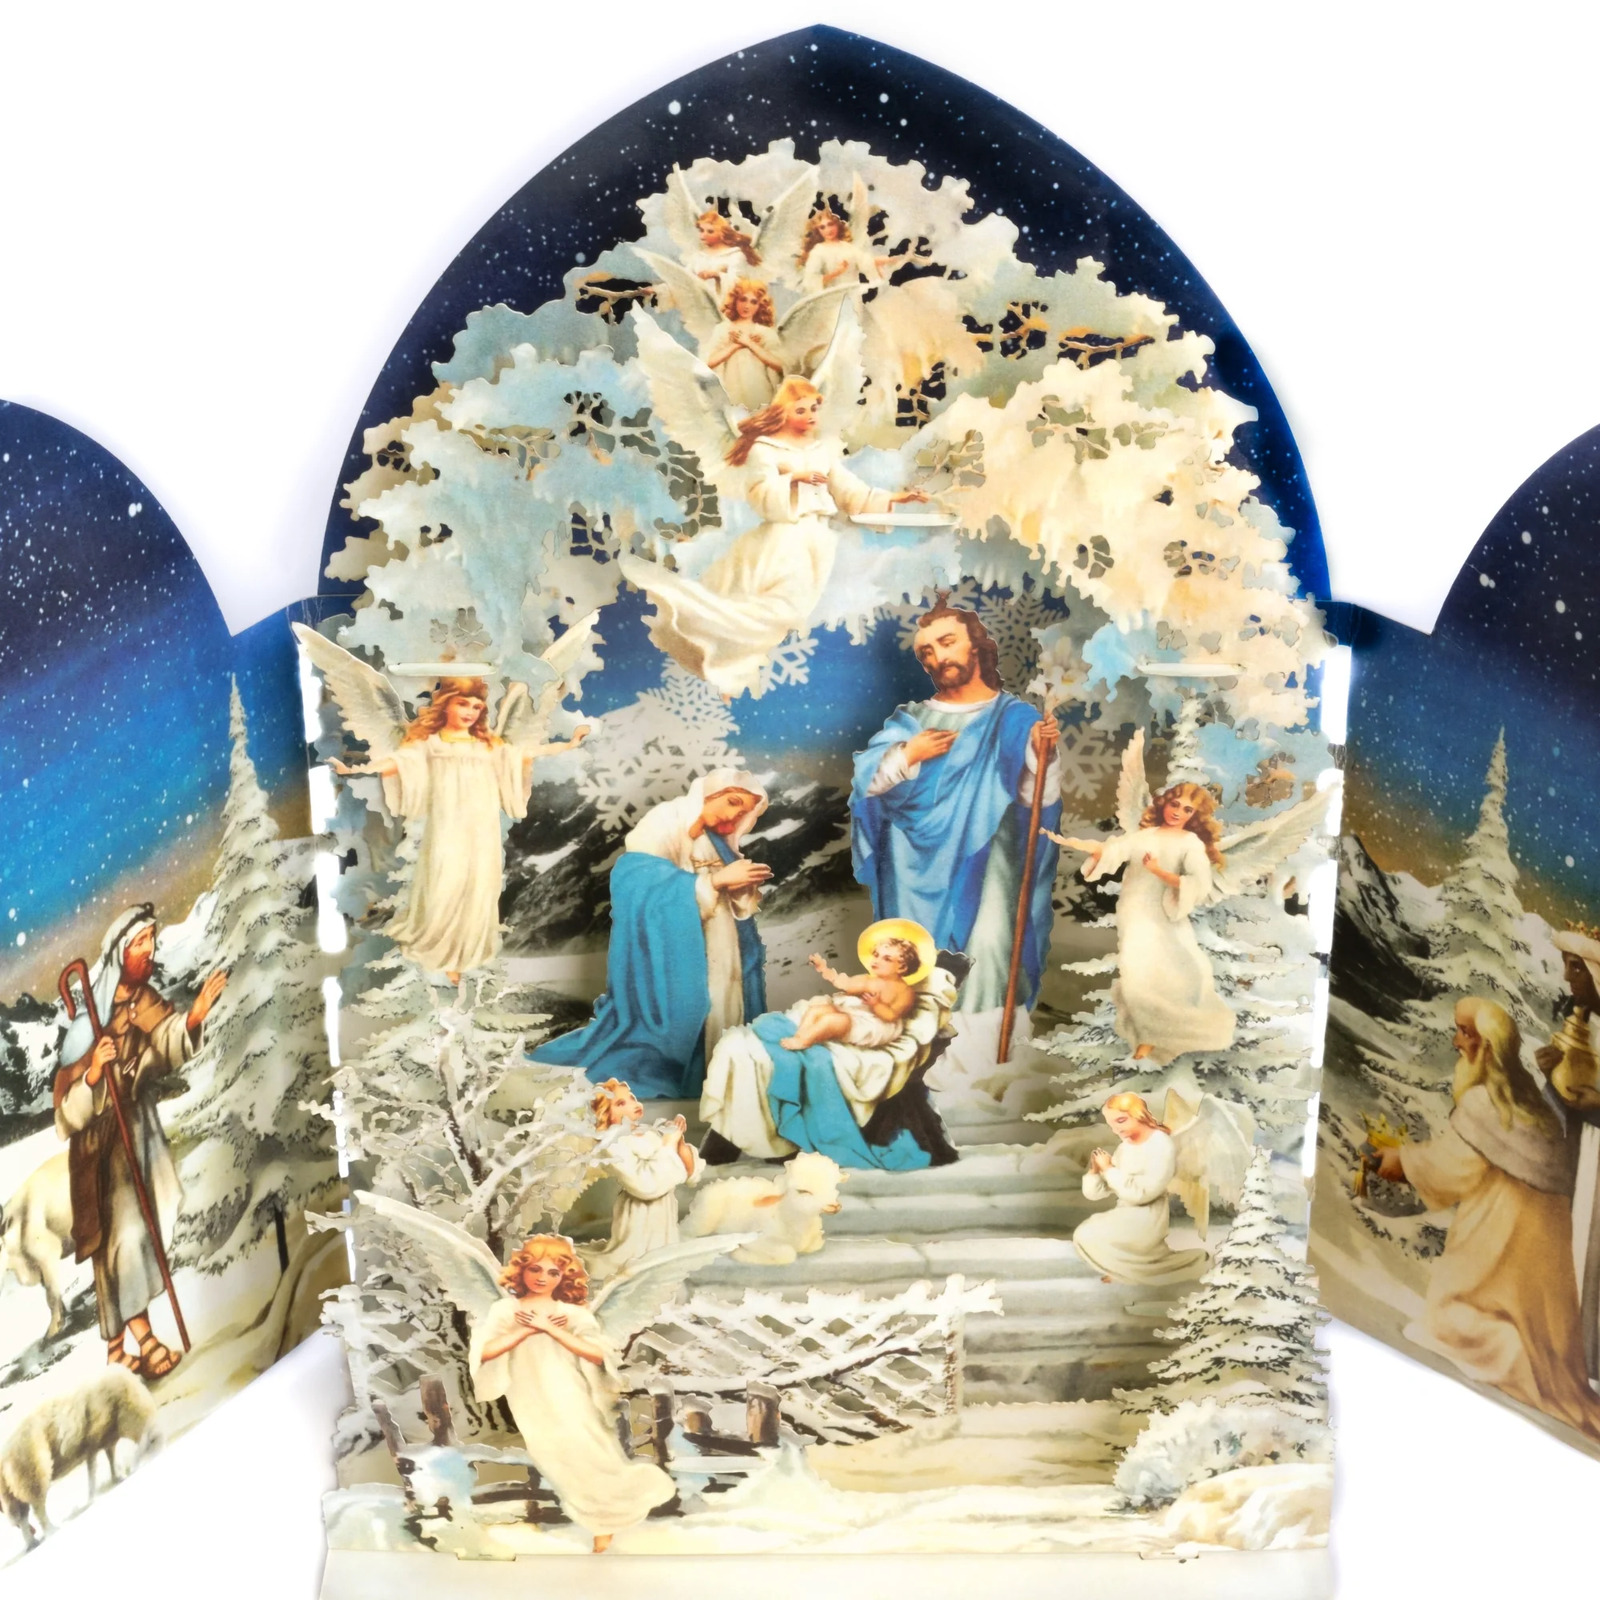 Merry Christmas Amazing 3D Pop-Up Greeting Card The Religious Christmas Nativity